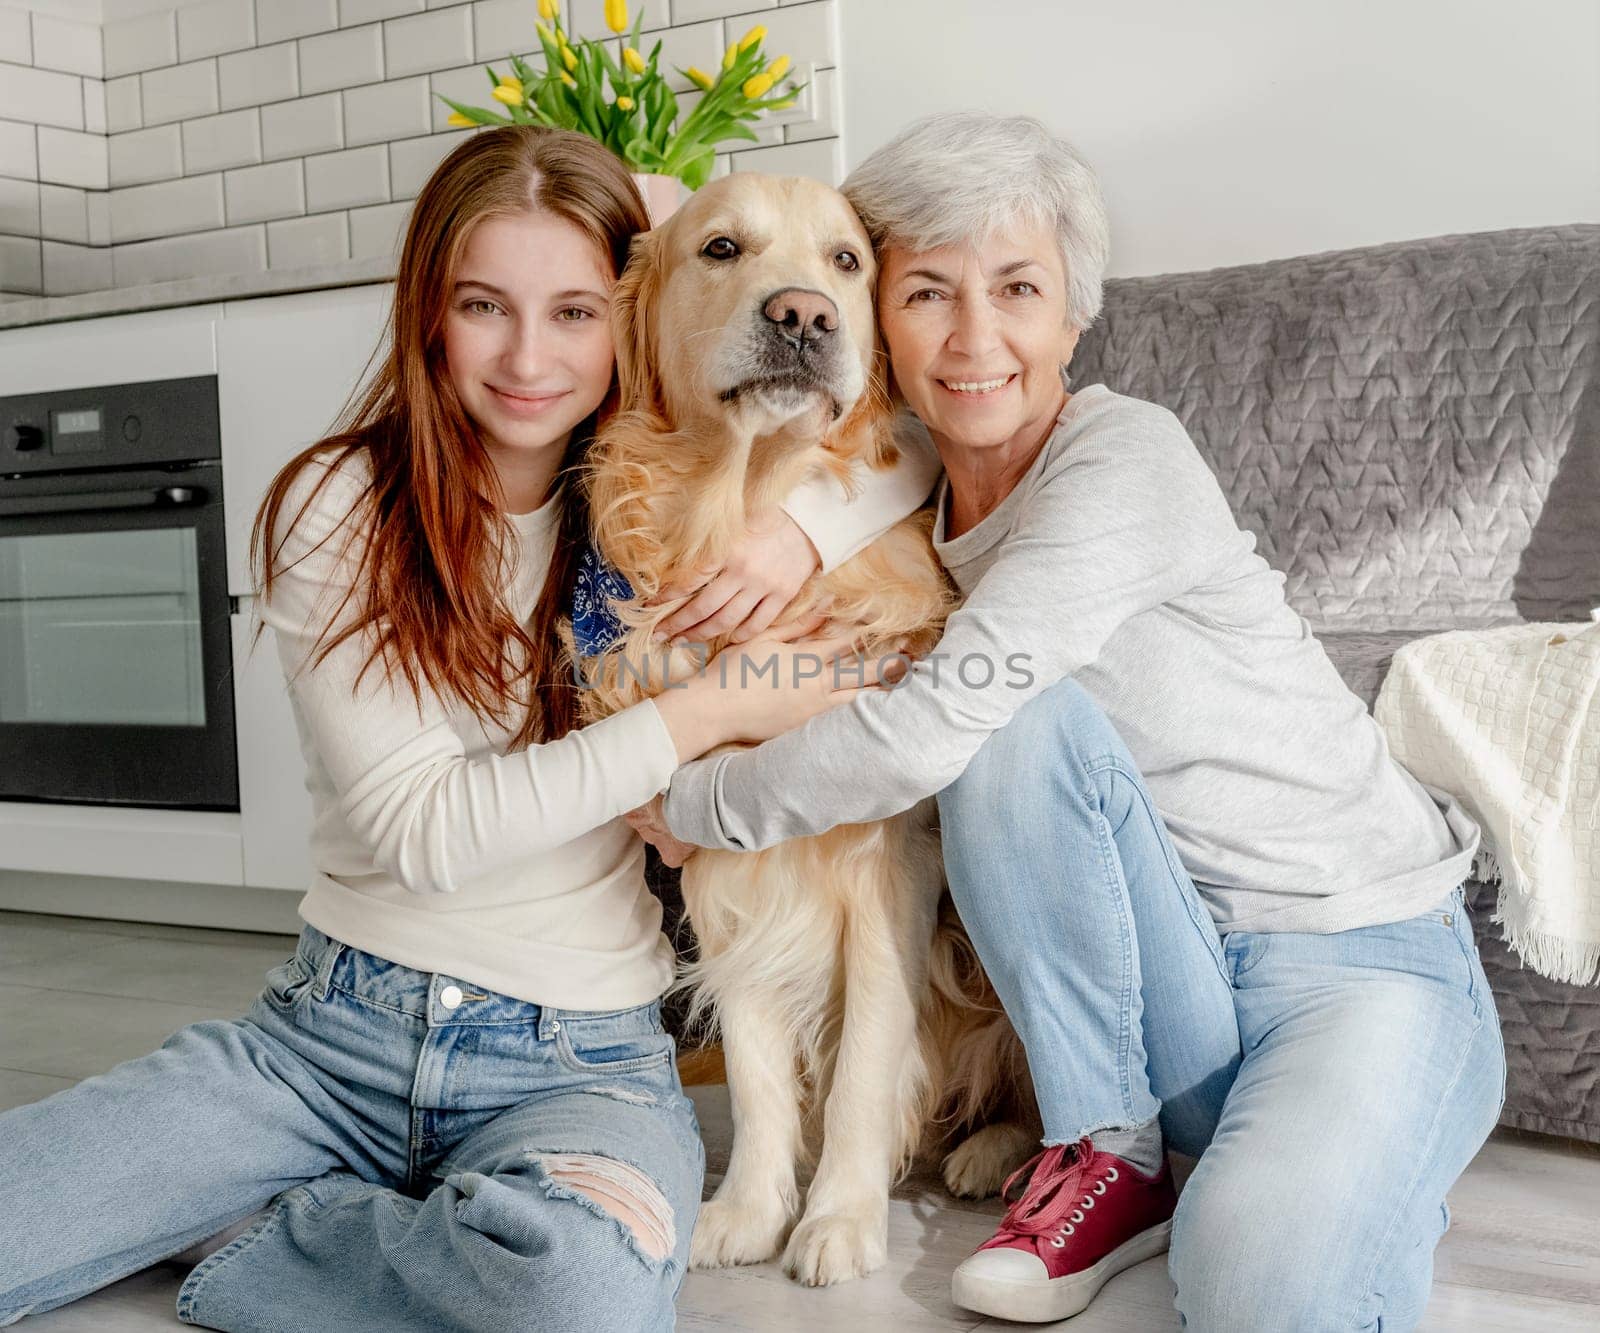 Teenage Girl And Her Grandmother With Golden Retriever Dog At Home In A Portrait